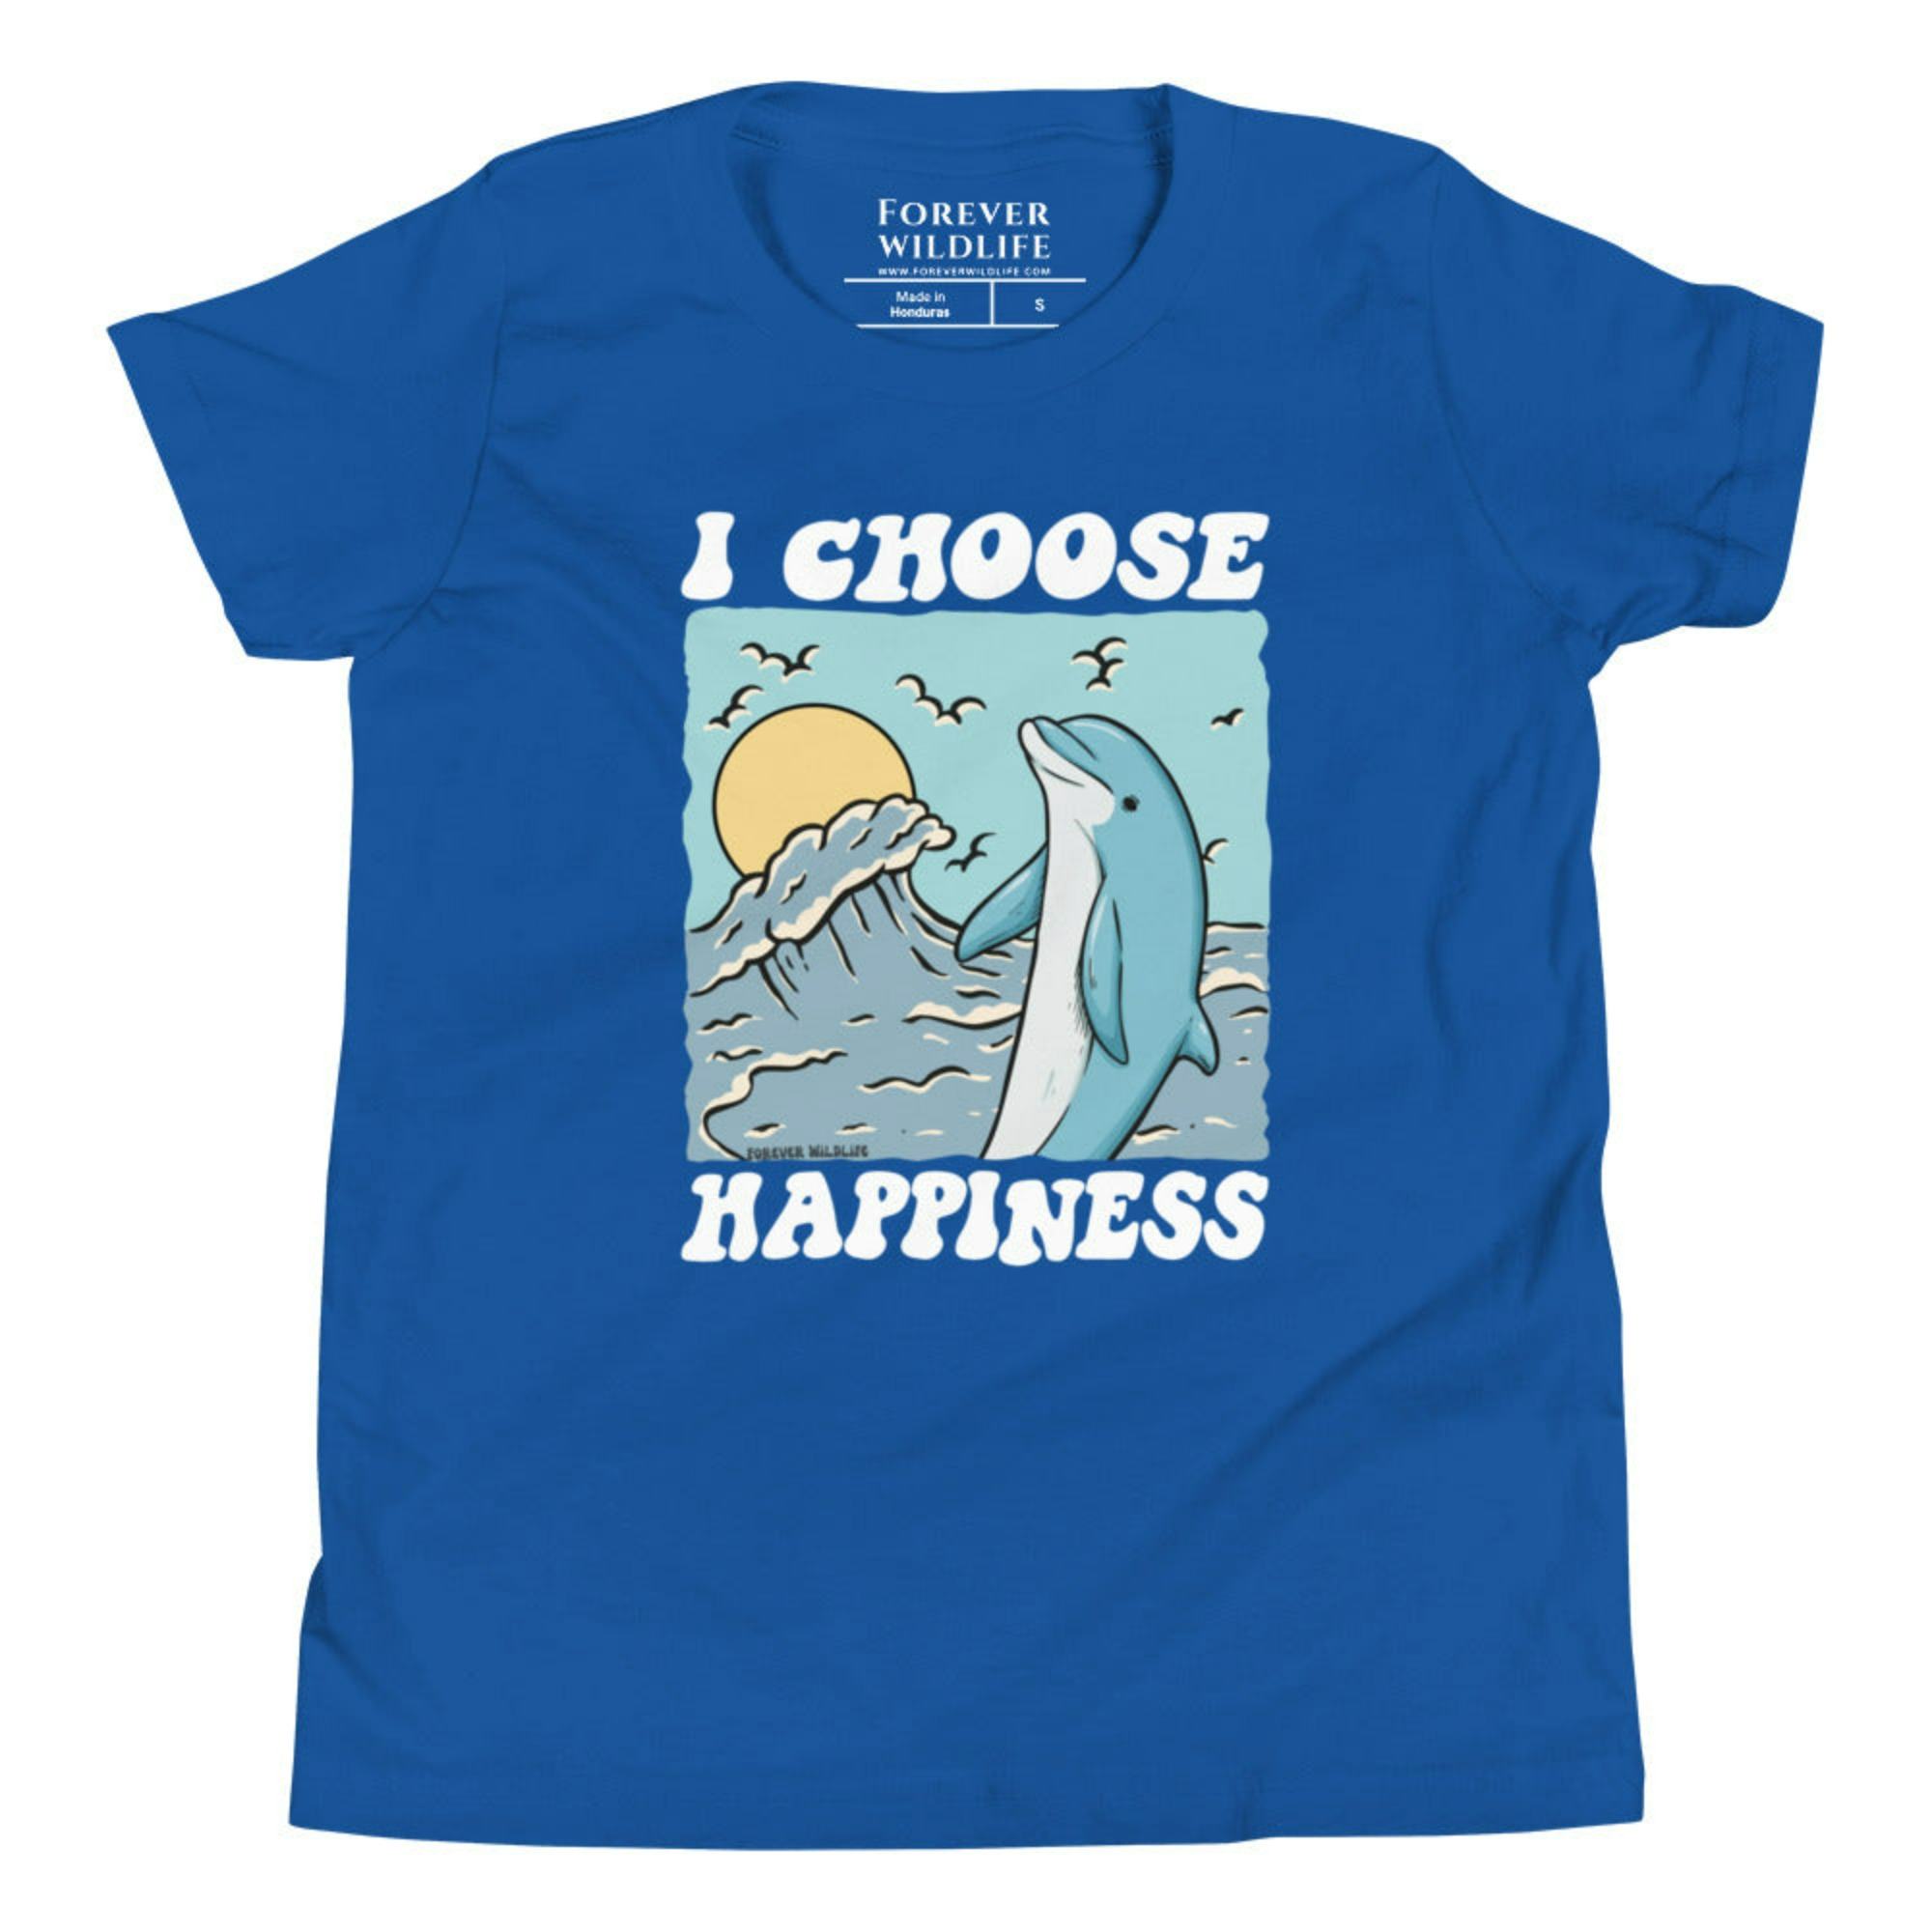 True Royal Dolphin Youth T-Shirt with dolphin graphic as part of Wildlife T-Shirts, Wildlife Clothing & Apparel by Forever Wildlife